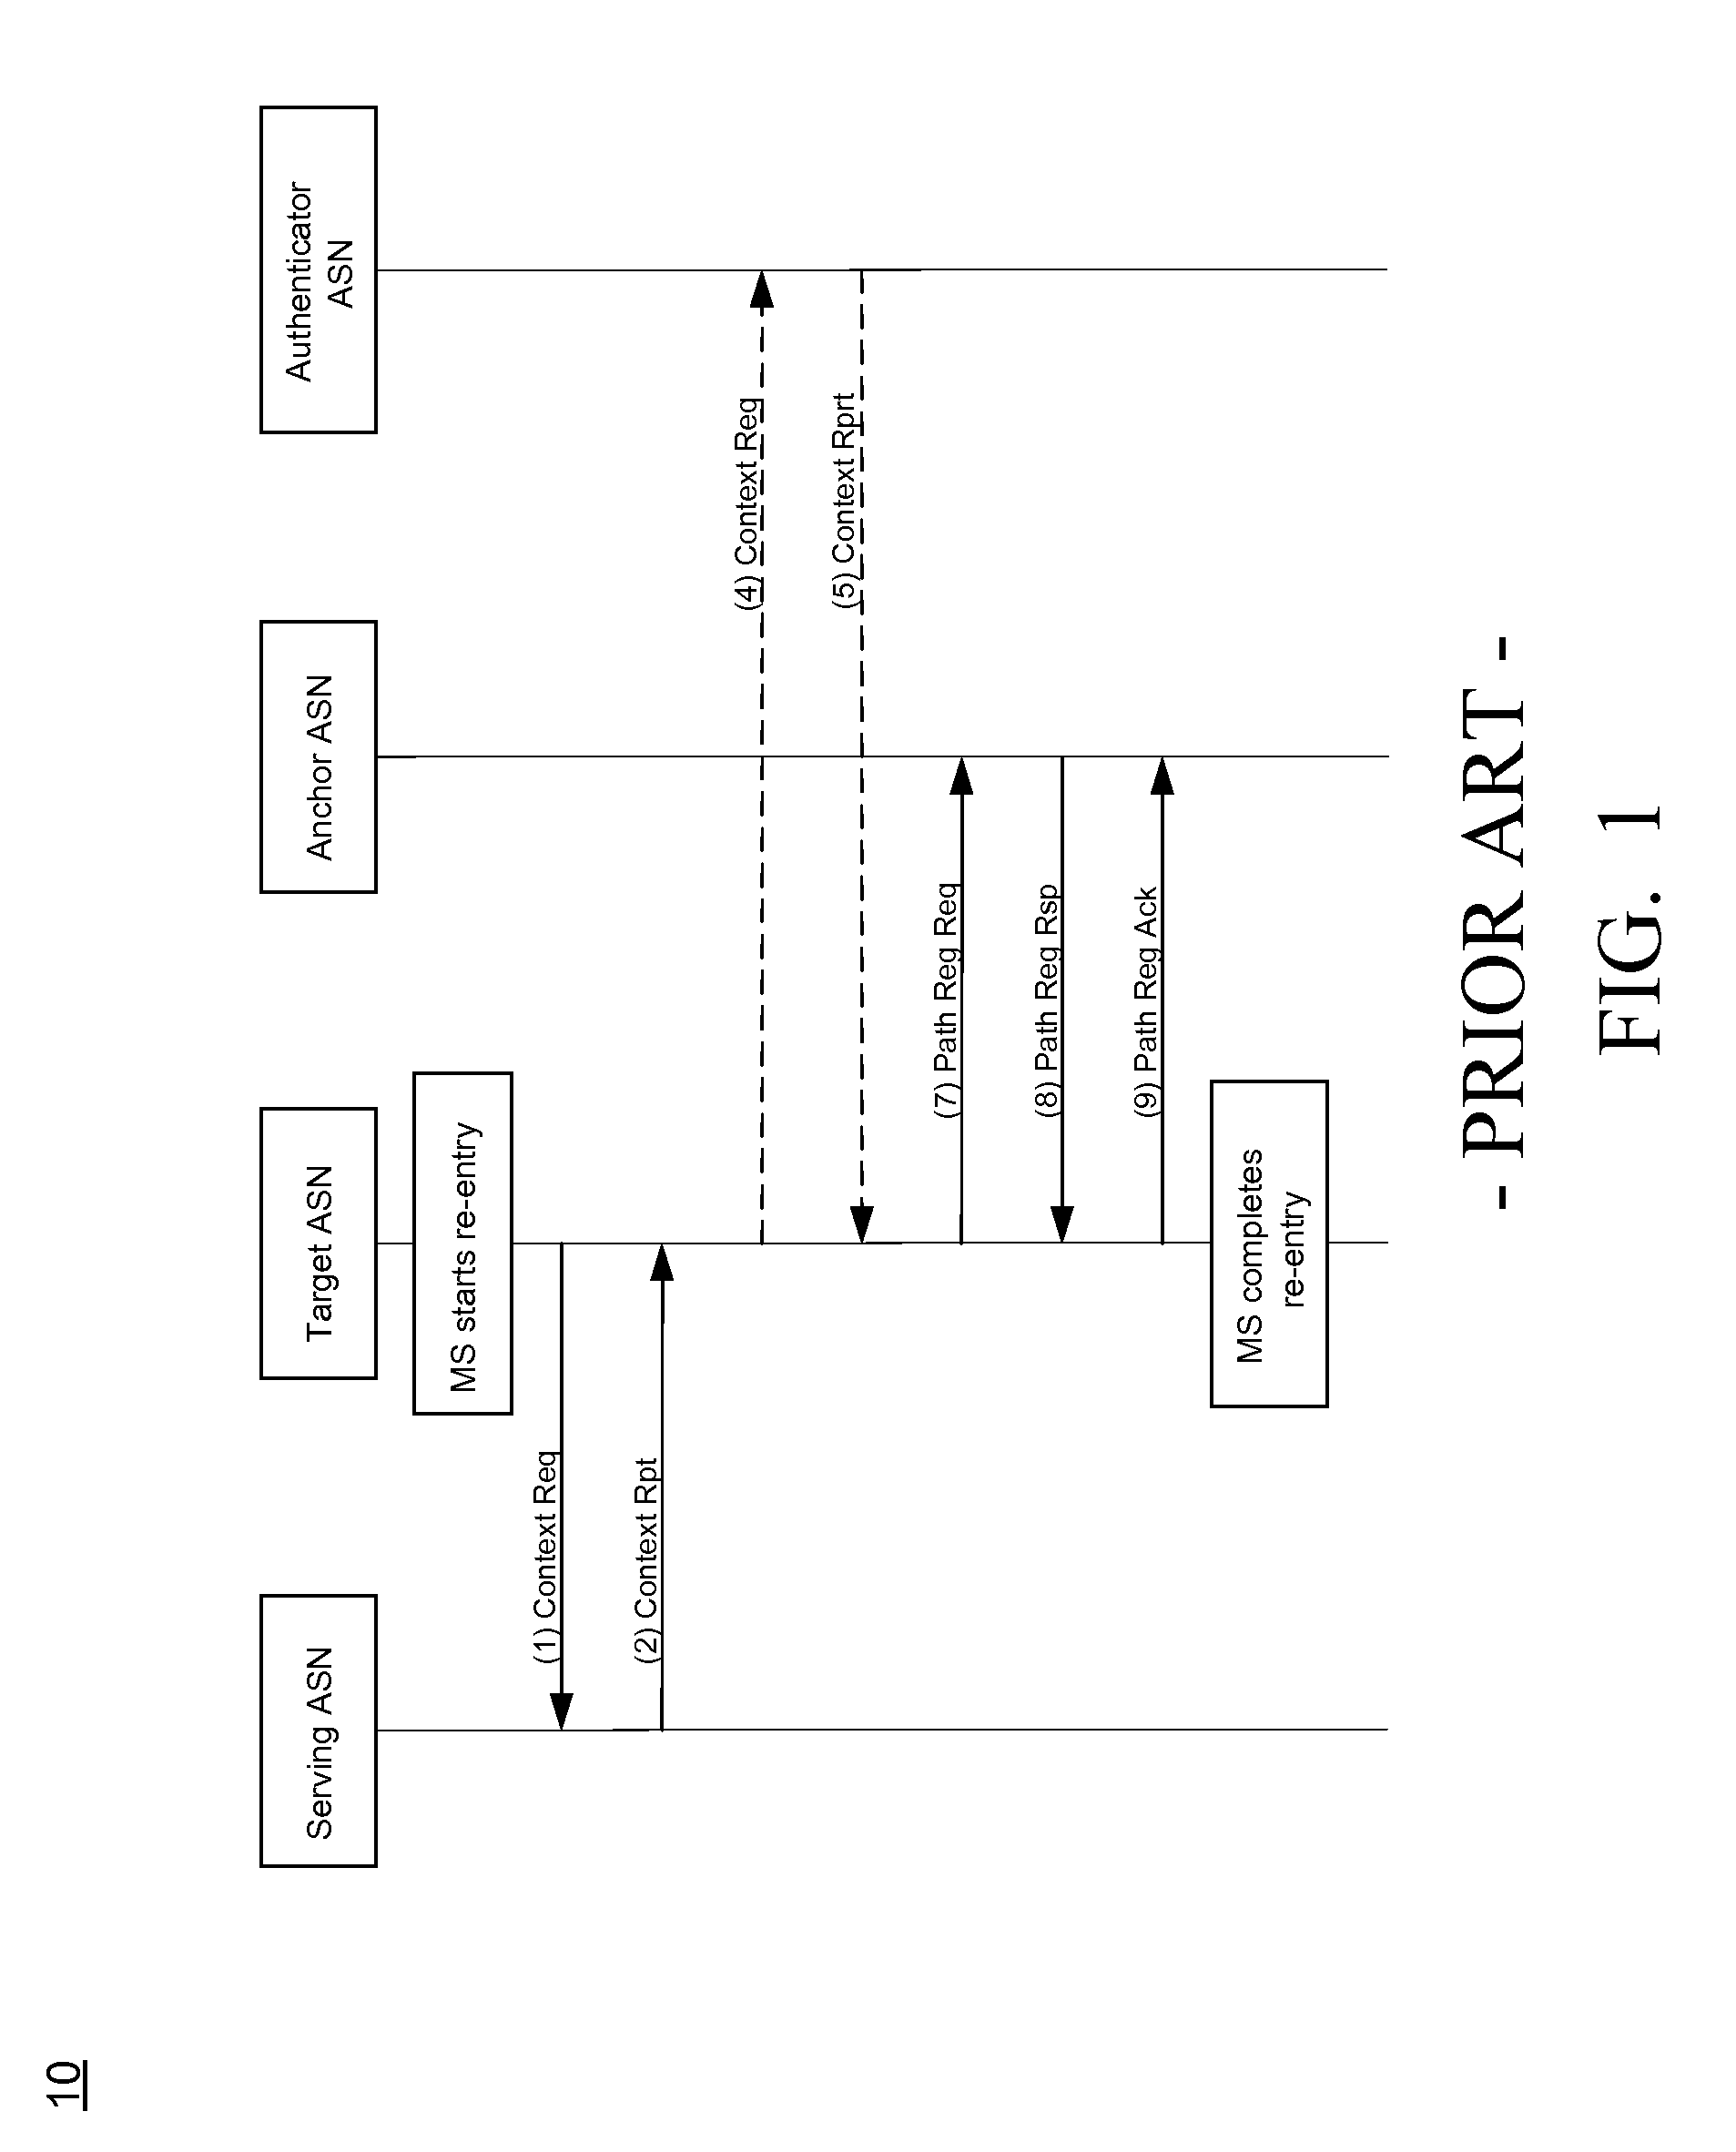 Method and apparatus for supporting handover in a communication network